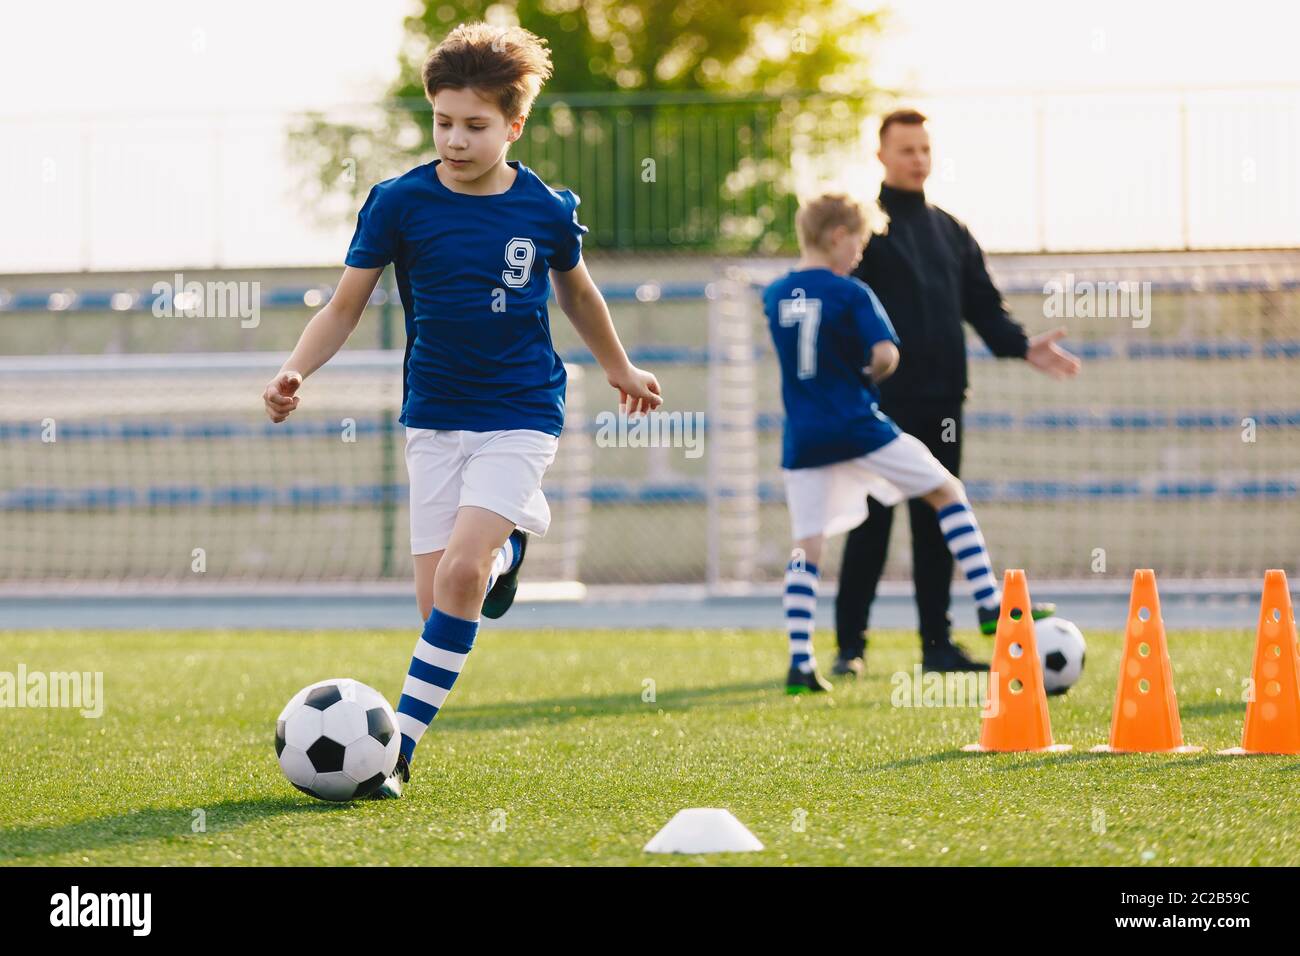 10 year old boy running soccer ball. Elementary age school kids on football training with young coach. Children sports team improving dribbling speed Stock Photo